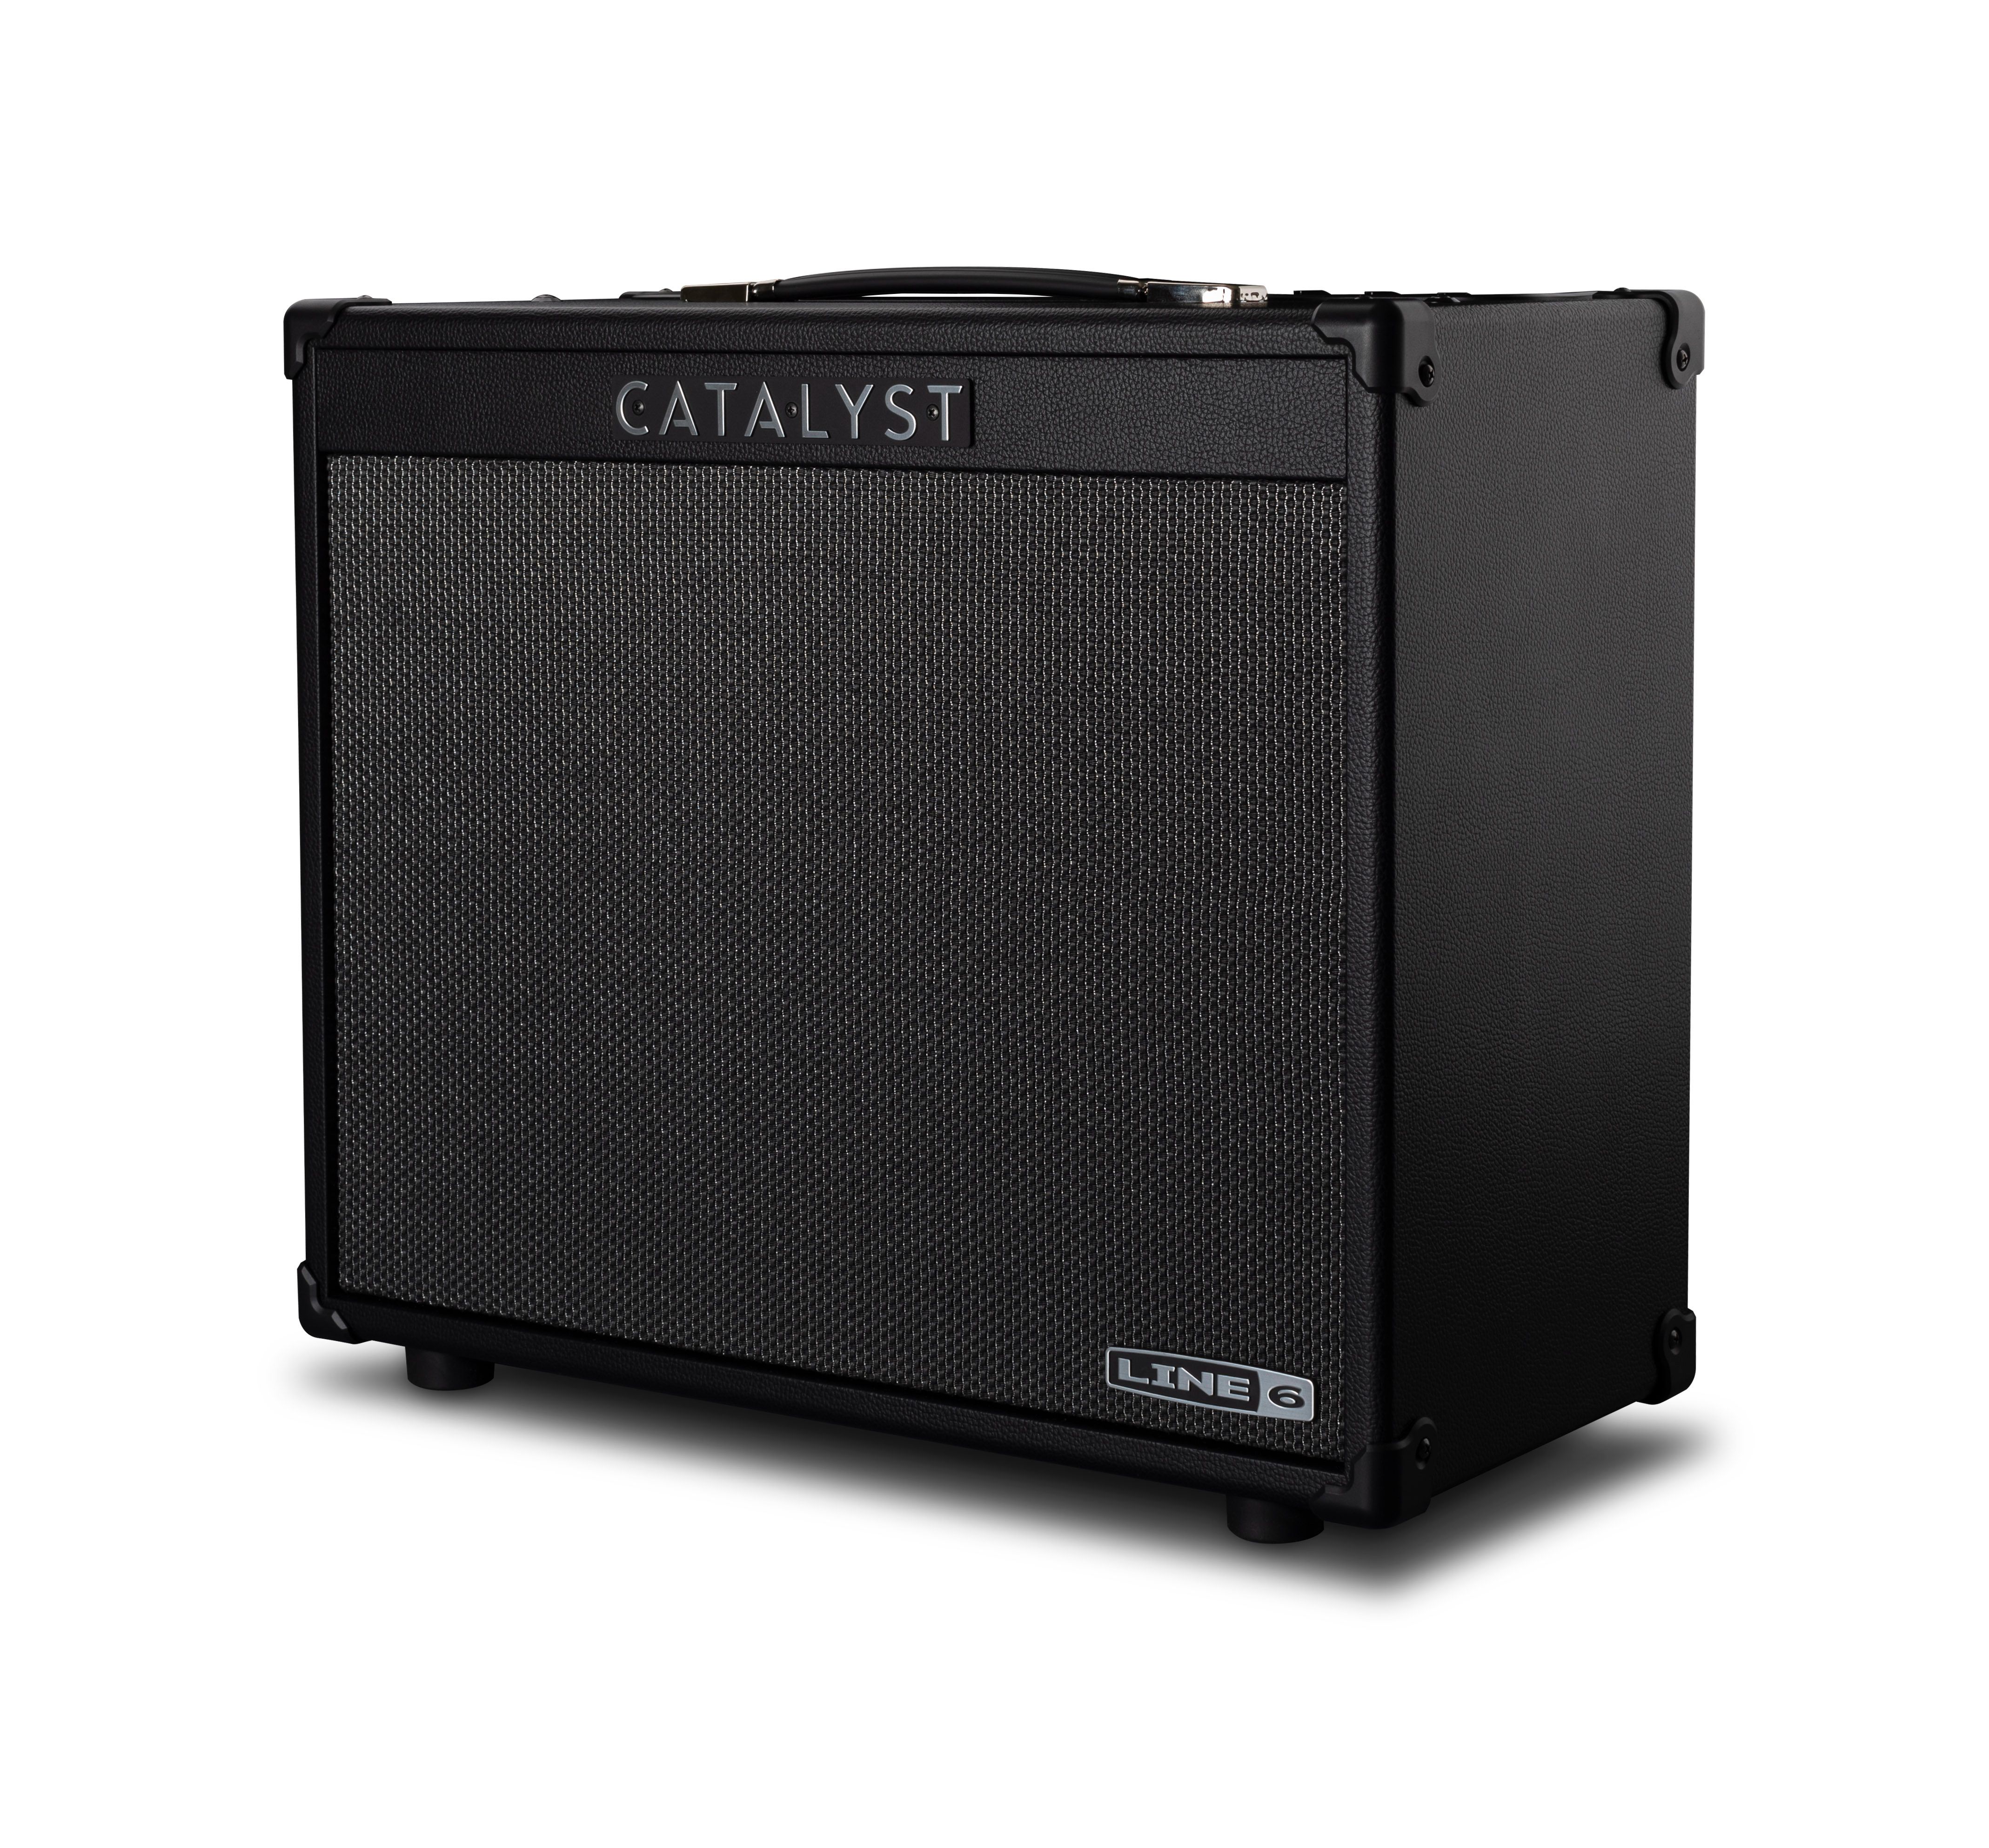 Line 6 Catalyst Combo 100w 1x12 - Electric guitar combo amp - Variation 2